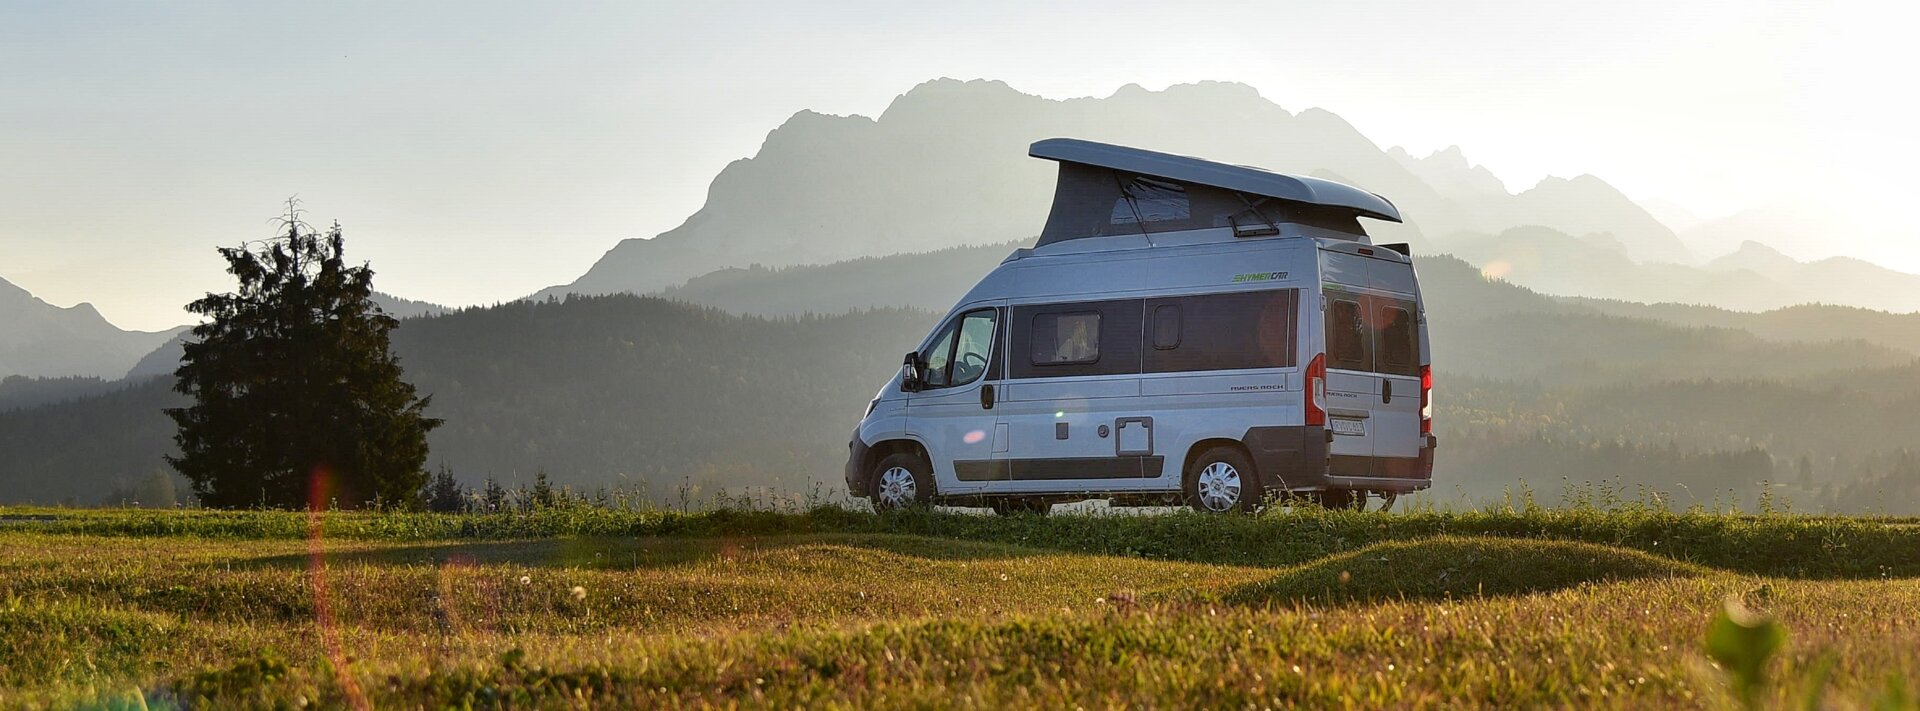 Fiat HYMER Camper Van in meadow with wooded hills